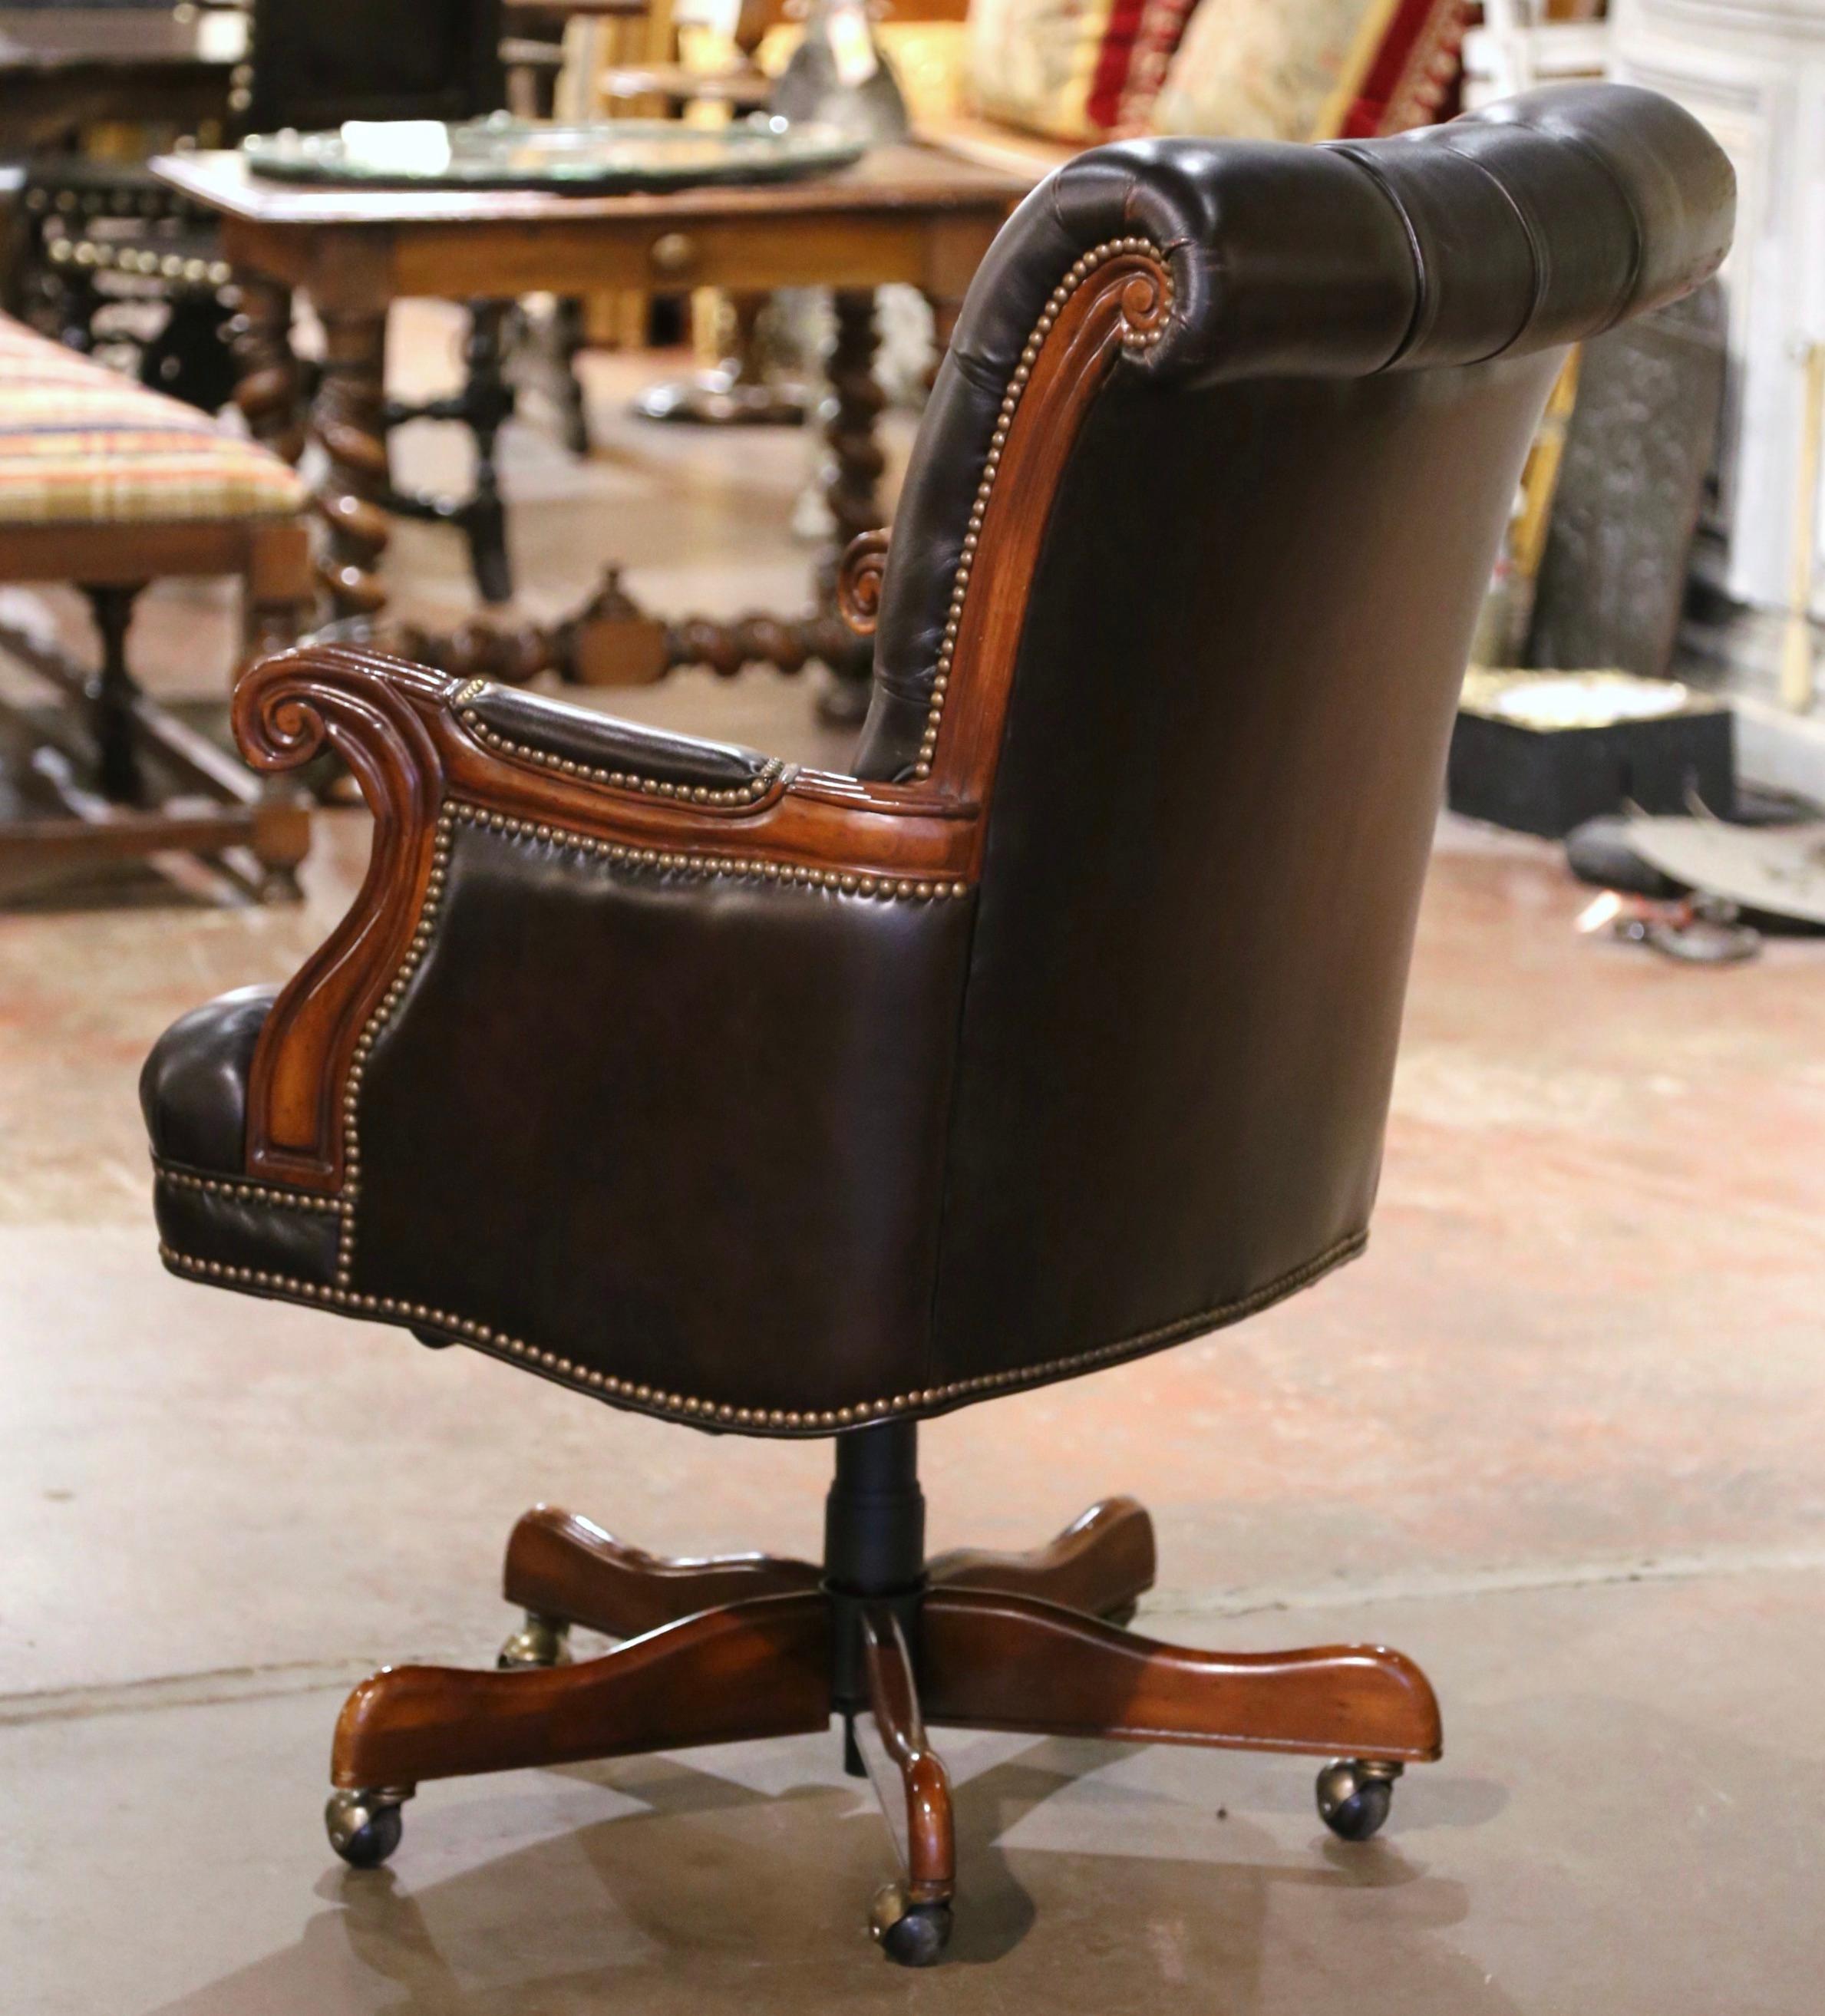 Vintage Adjustable and Swivel Executive Office Desk Armchair with Tufted Leather 4